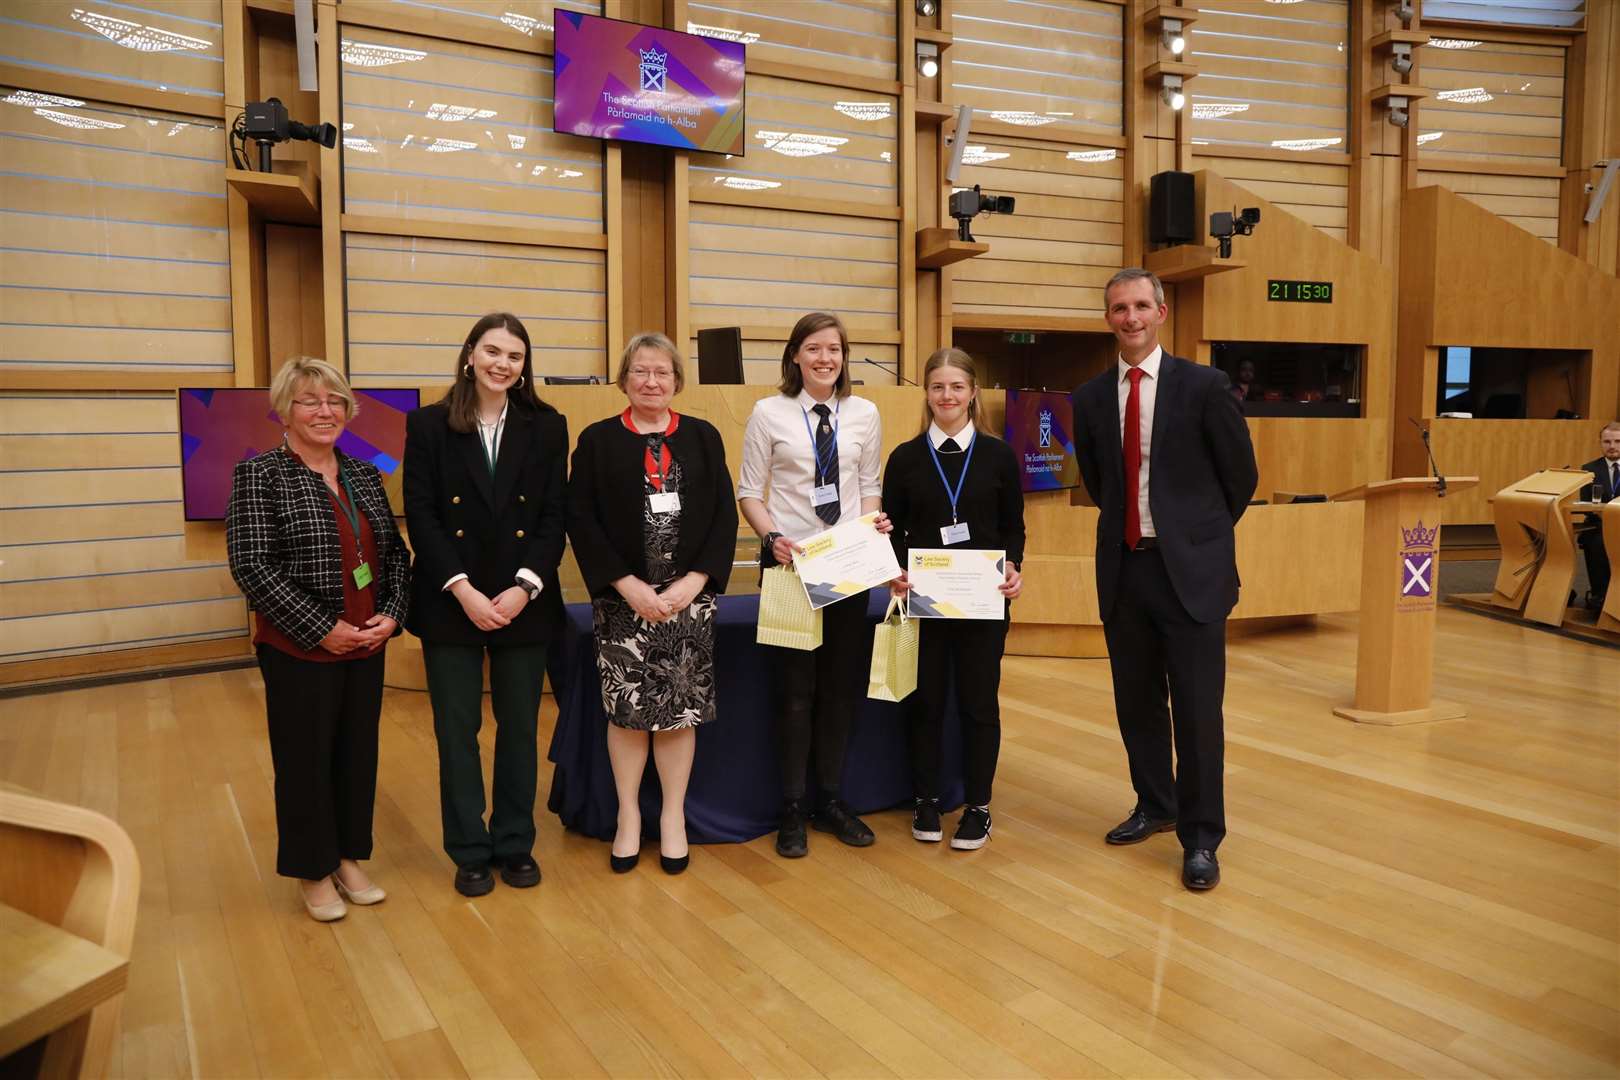 Pictured (left to right) are Liz Campbell (Law Society Executive Director of Education, Training and Qualifications), Georgia Turnbull (Law Society Careers and Outreach Coordinator), Sheila Webster (Law Society Deputy President), Aimee Ross, Orla McMichael and Deputy Presiding Officer Liam McArthur MSP.